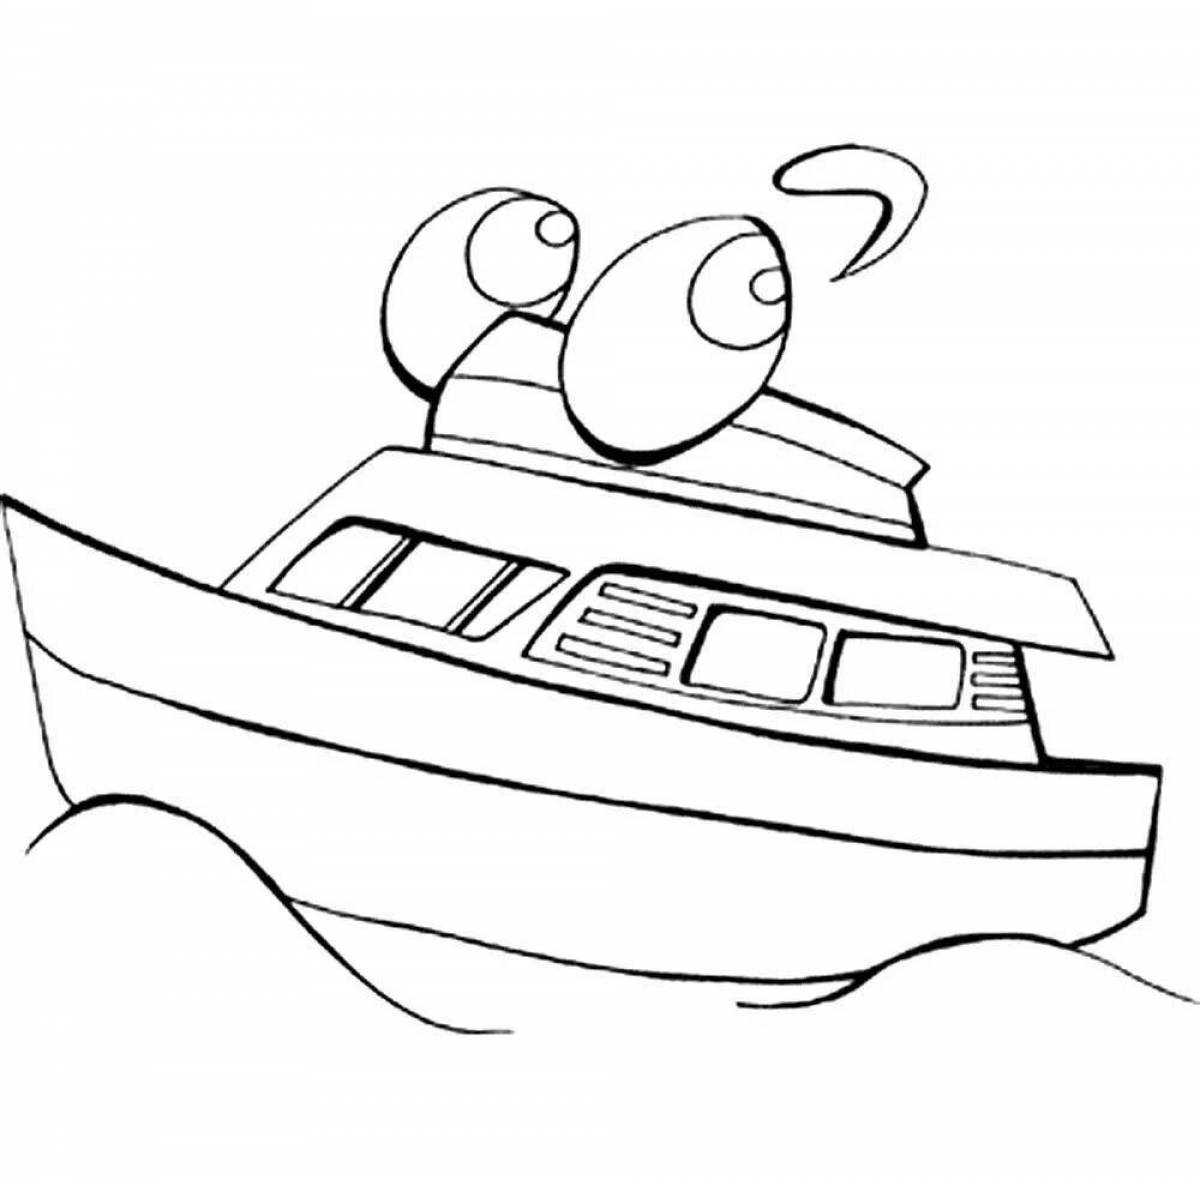 Coloring yacht for kids